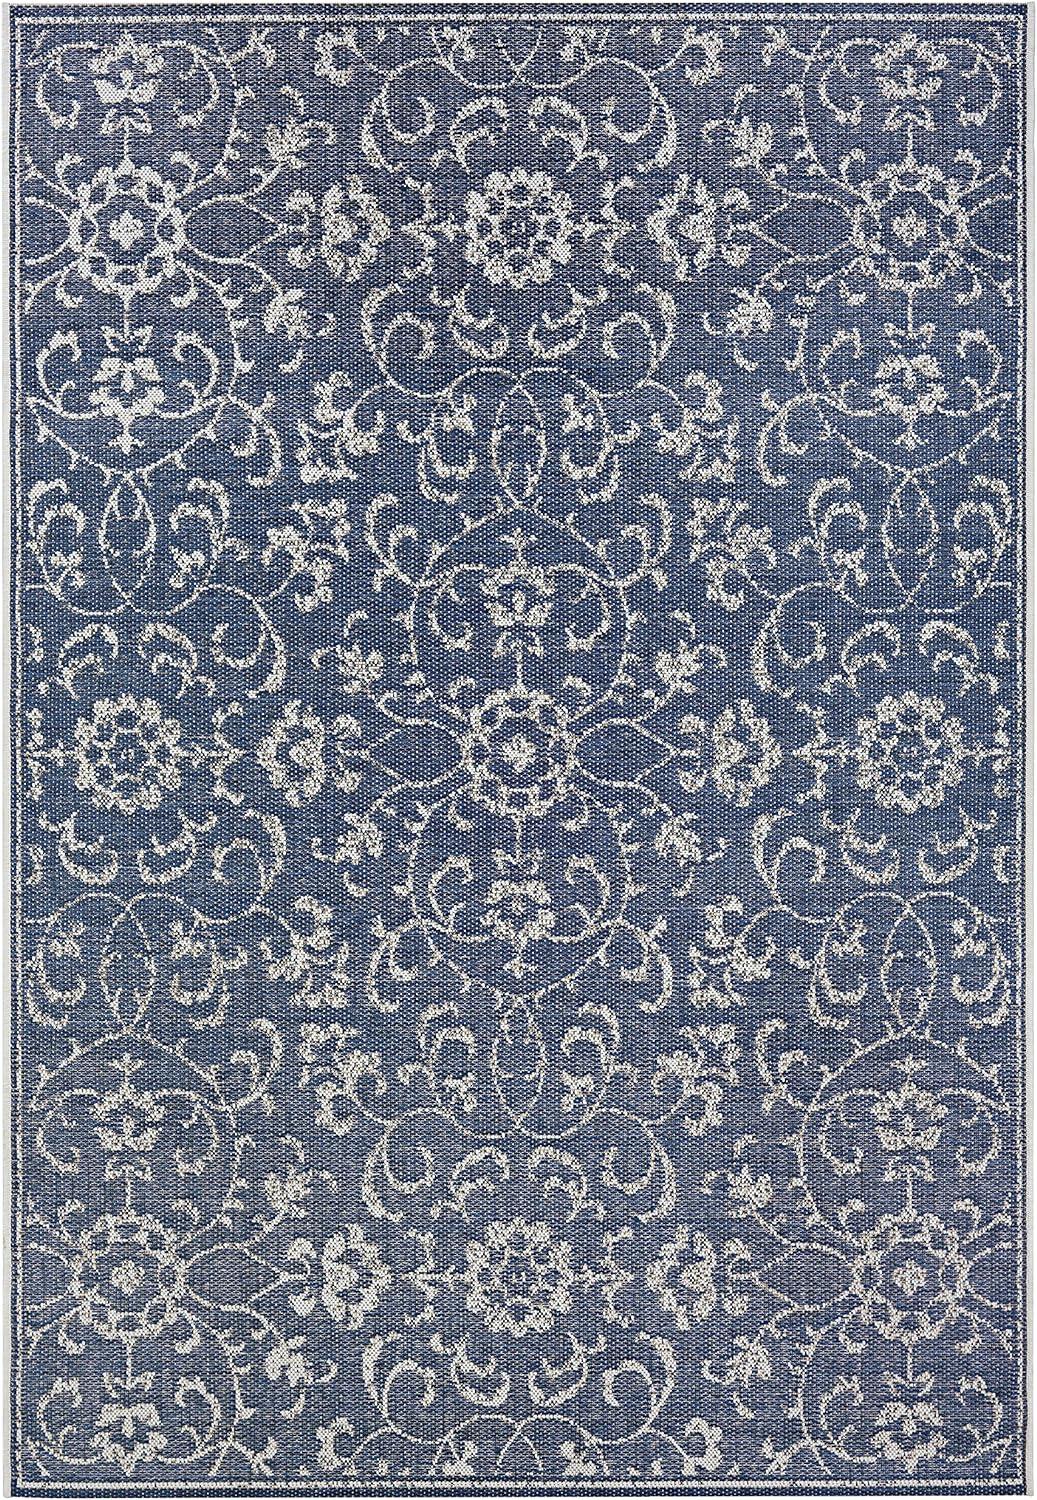 Ivory Floral Symphony Indoor/Outdoor Easy Care Area Rug, 5'3" x 7'6"